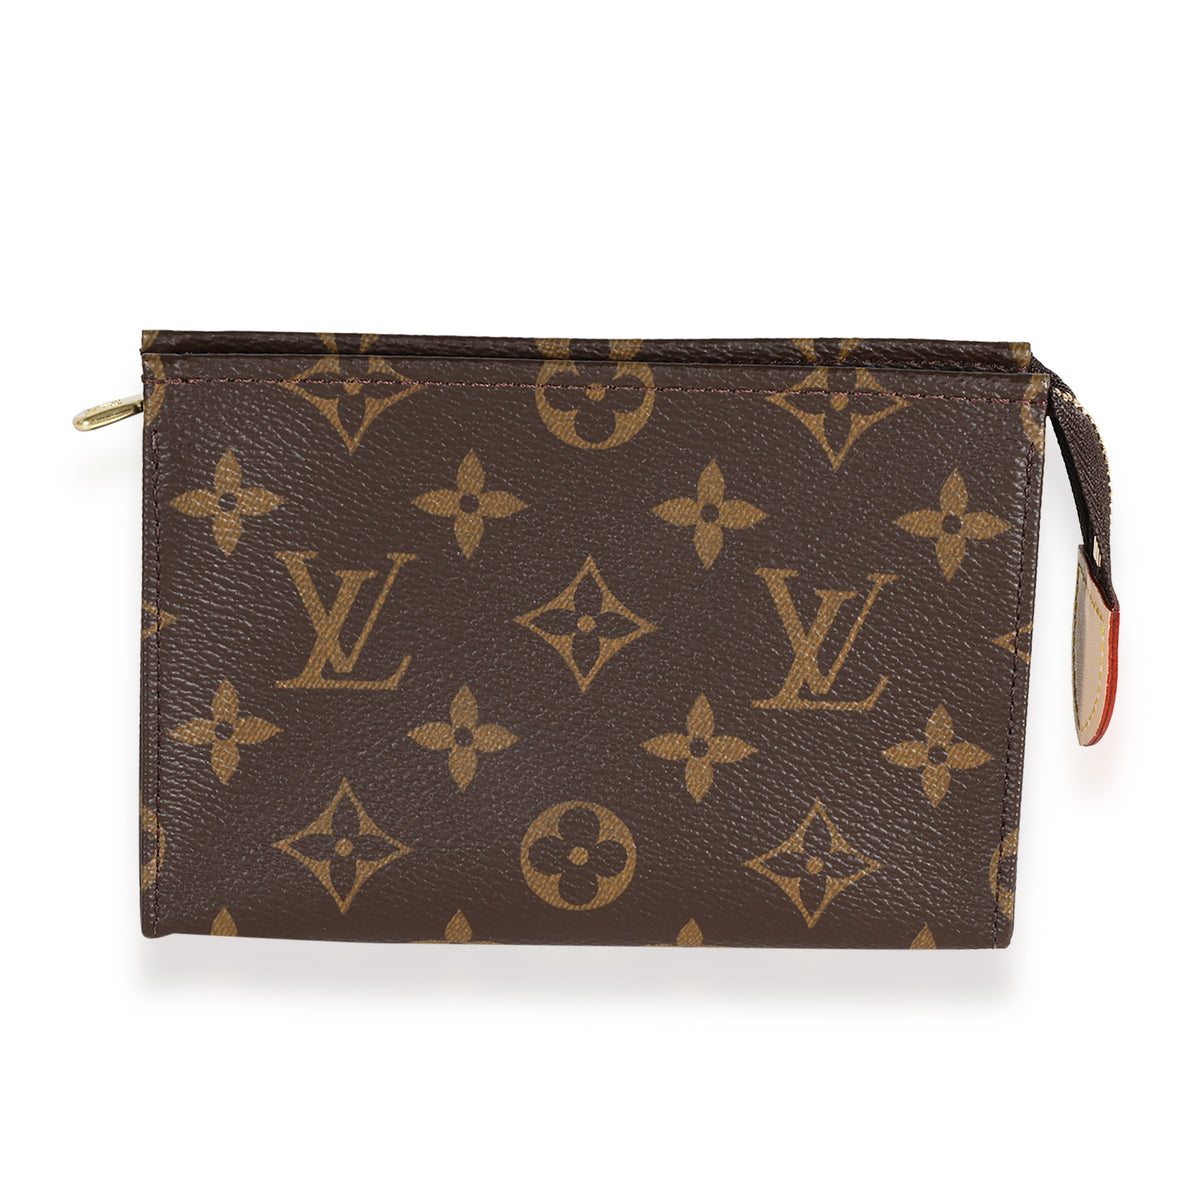 TOILETRY POUCH 15 Been waiting for her for months and she is cuter than I  imagined  rLouisvuitton